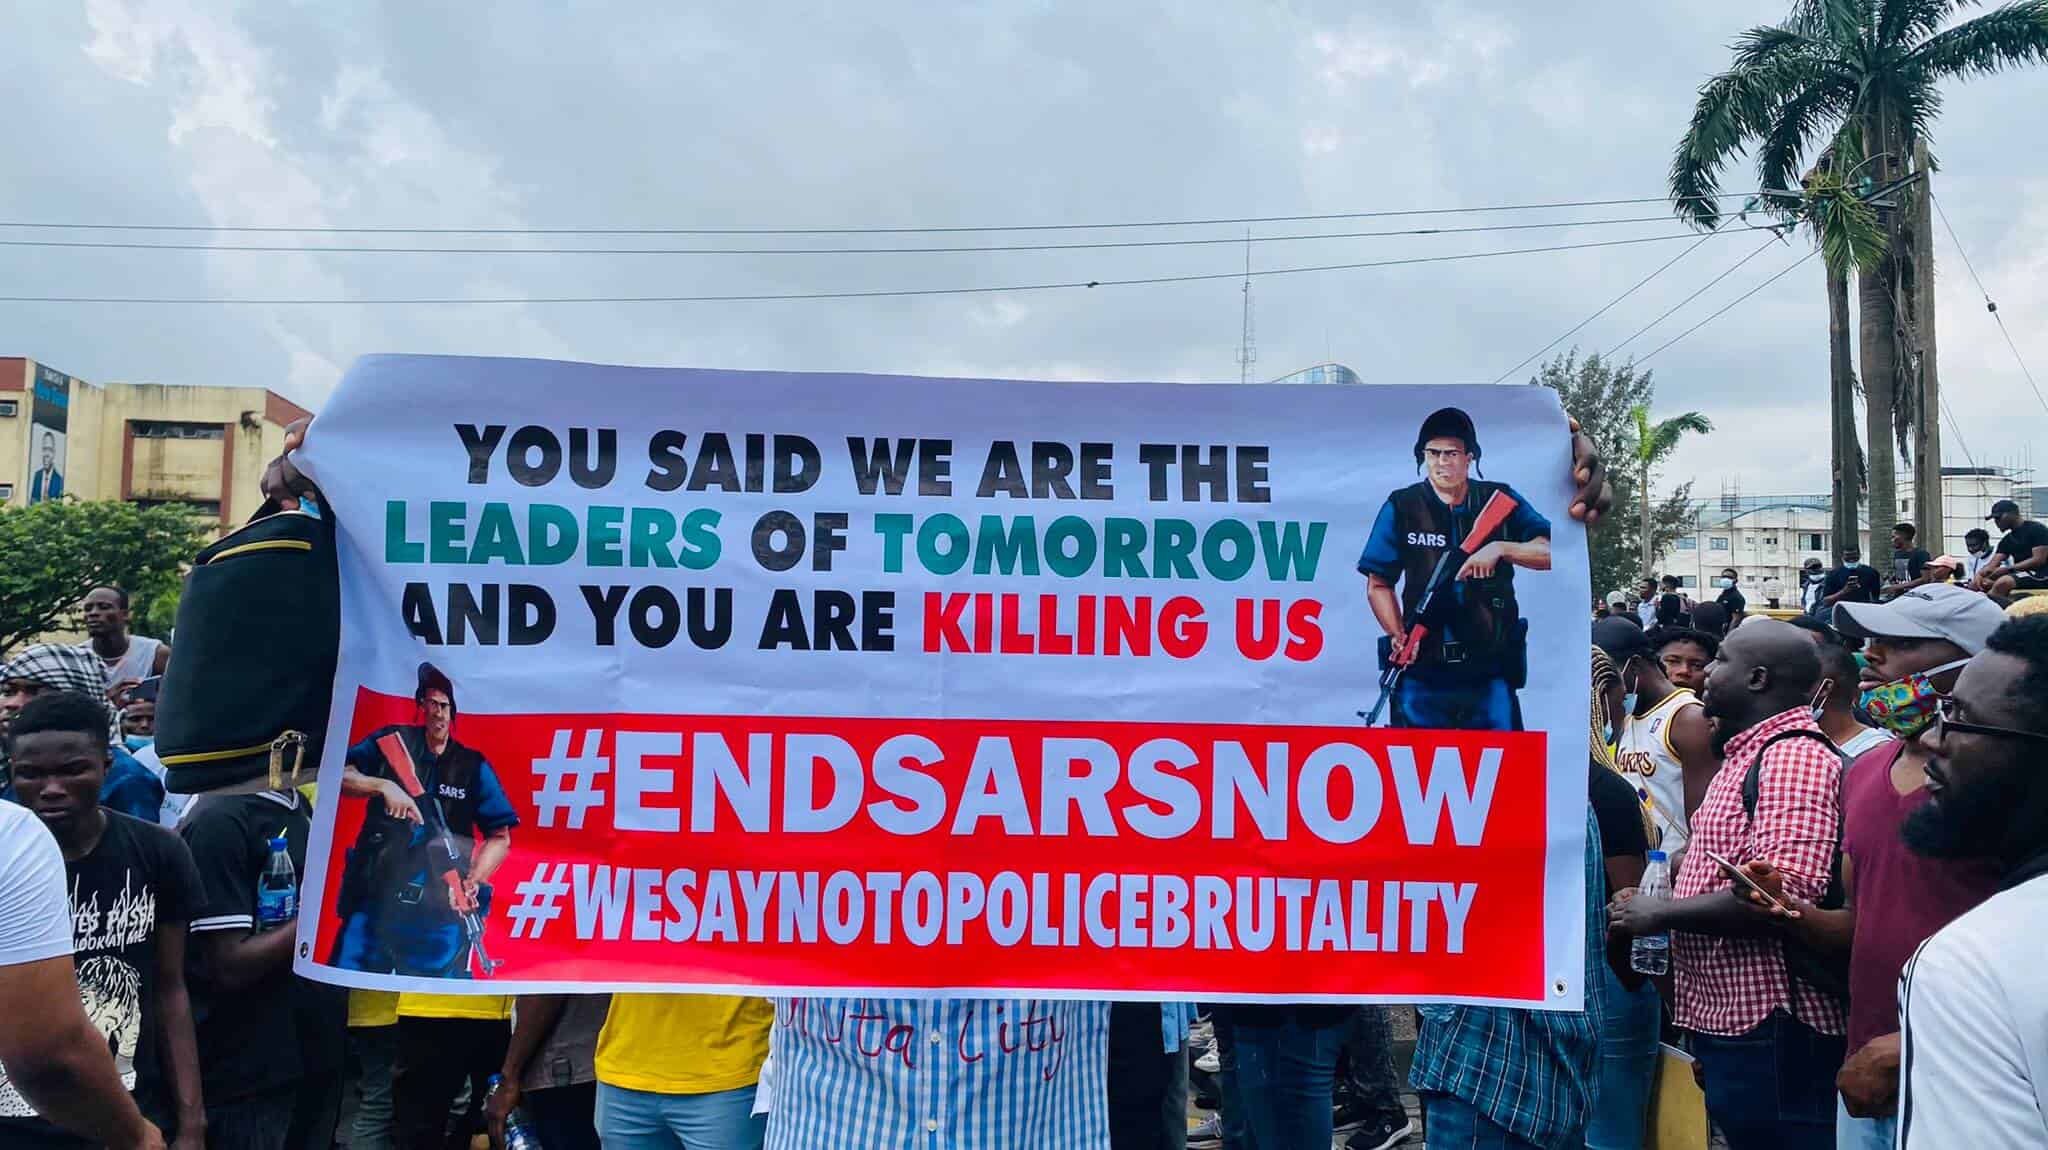 An update on the Nigerian Government’s response to #EndSARS protests